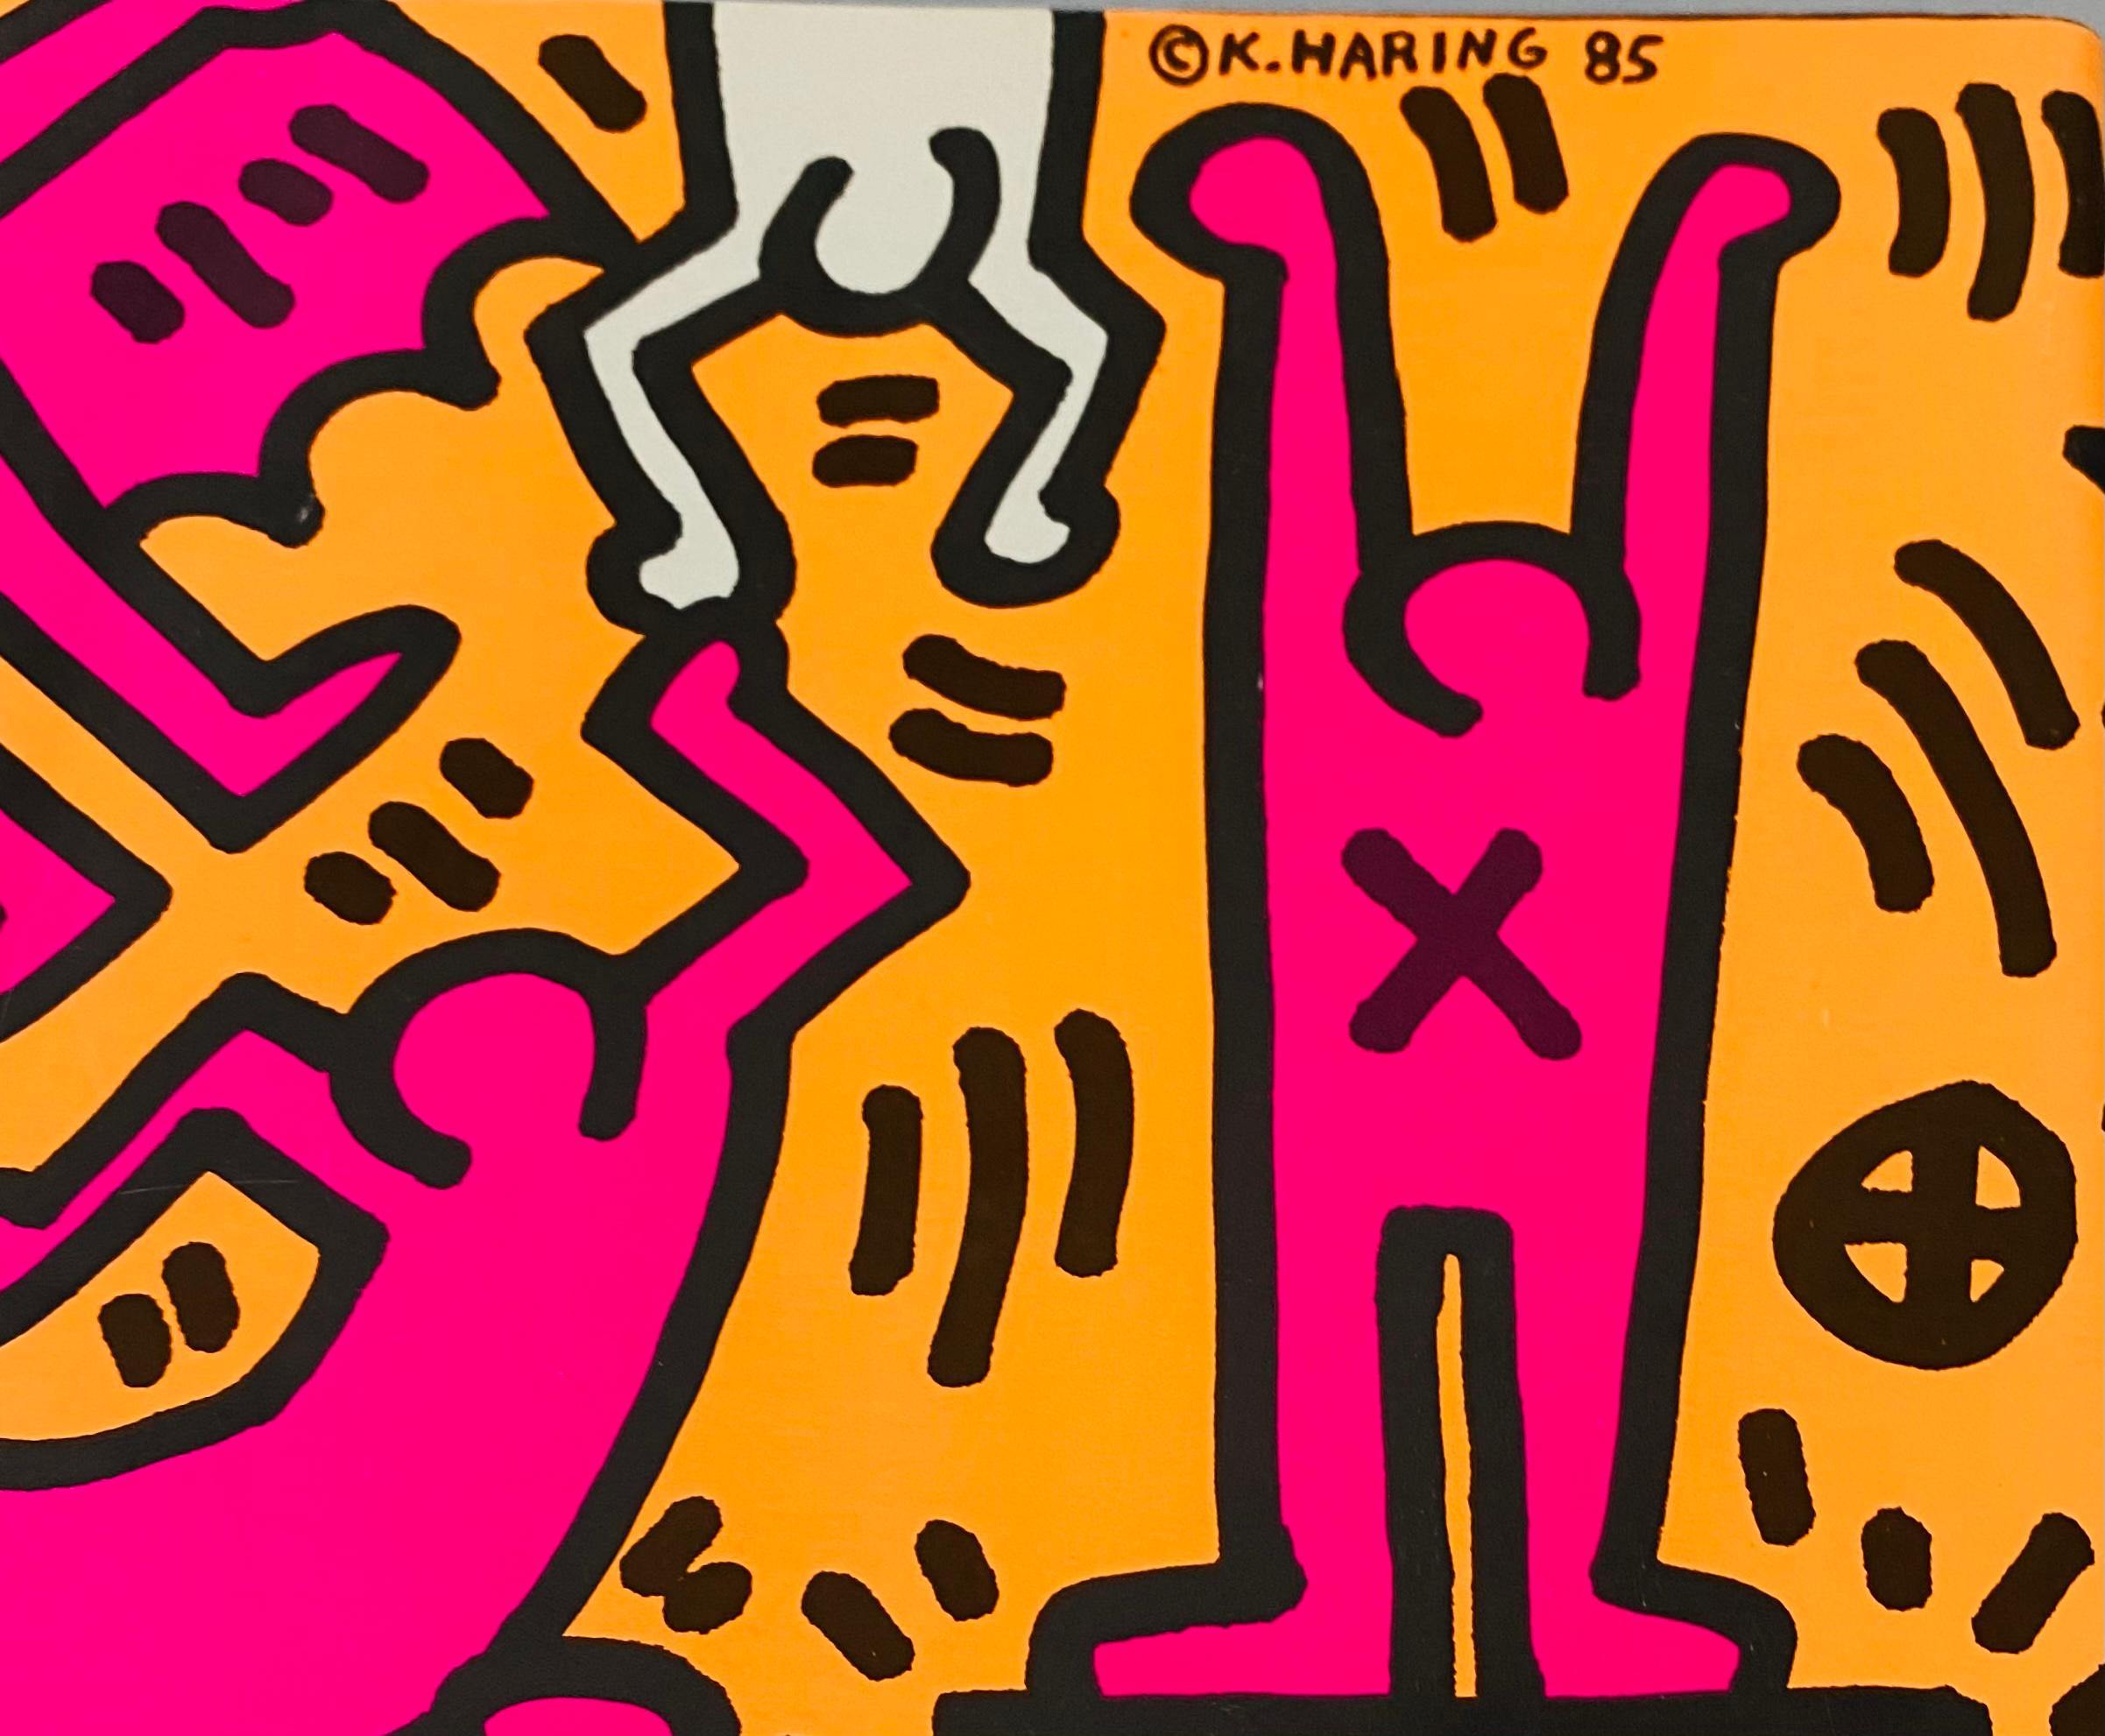 
Keith Haring New Music Distribution Service catalog, 1986:
1980s music distribution catalog featuring original cover art by Keith Haring. Features Haring plate signature on the verso and Haring credit on interior. Rare, especially in nice condition